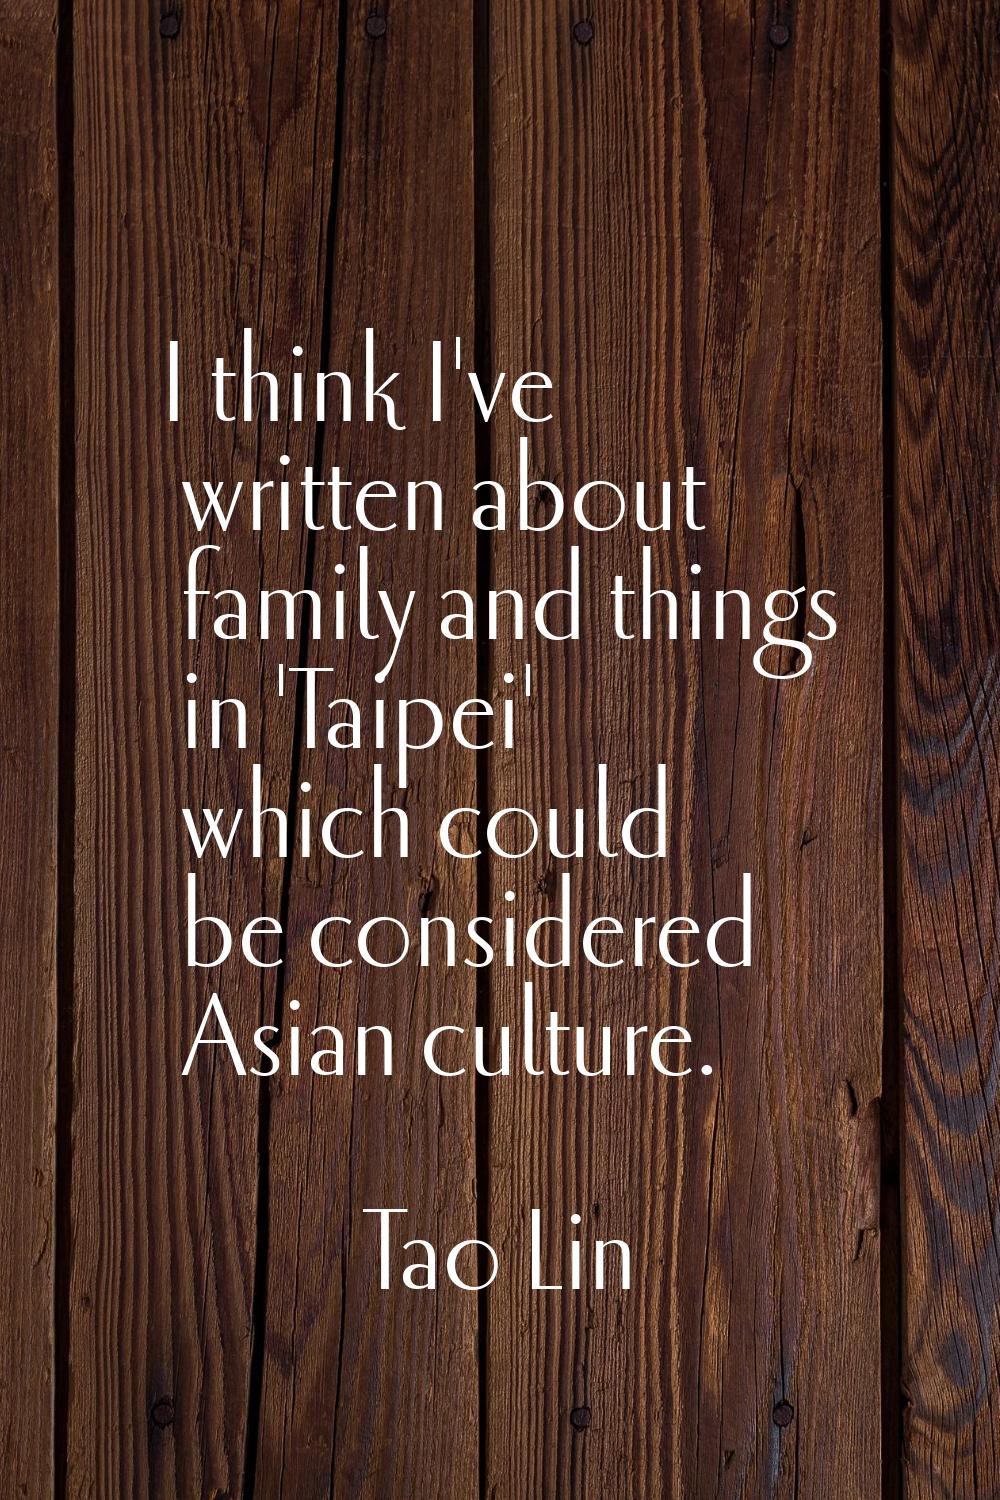 I think I've written about family and things in 'Taipei' which could be considered Asian culture.